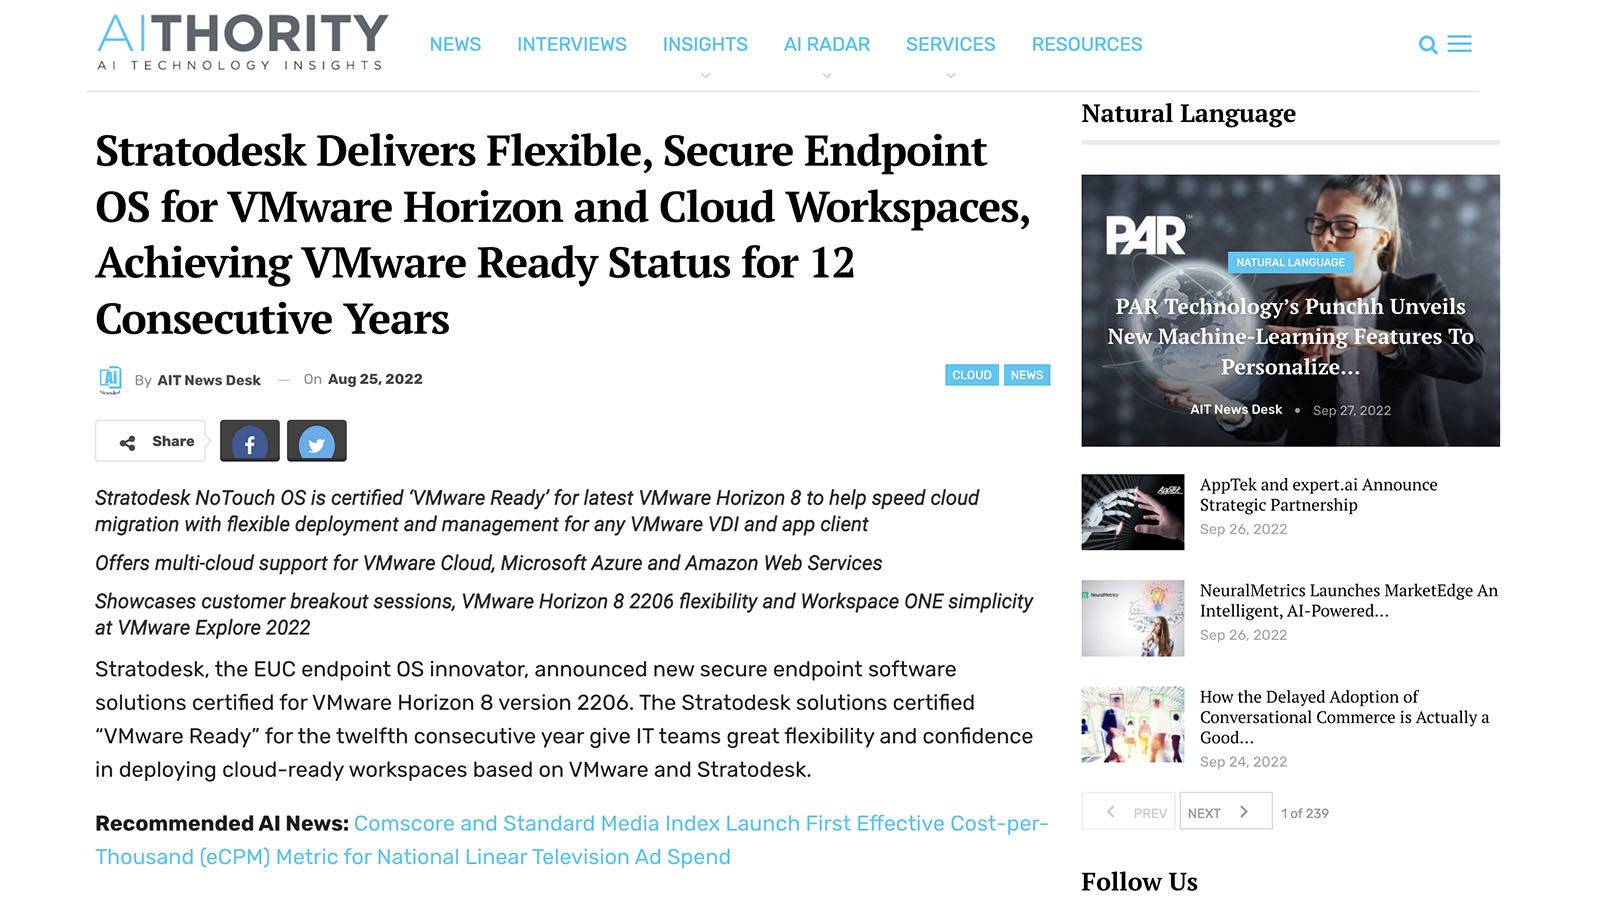 Stratodesk Delivers Flexible, Secure Endpoint OS for VMware Horizon and Cloud Workspaces, Achieving VMware Ready Status for 12 Consecutive Years